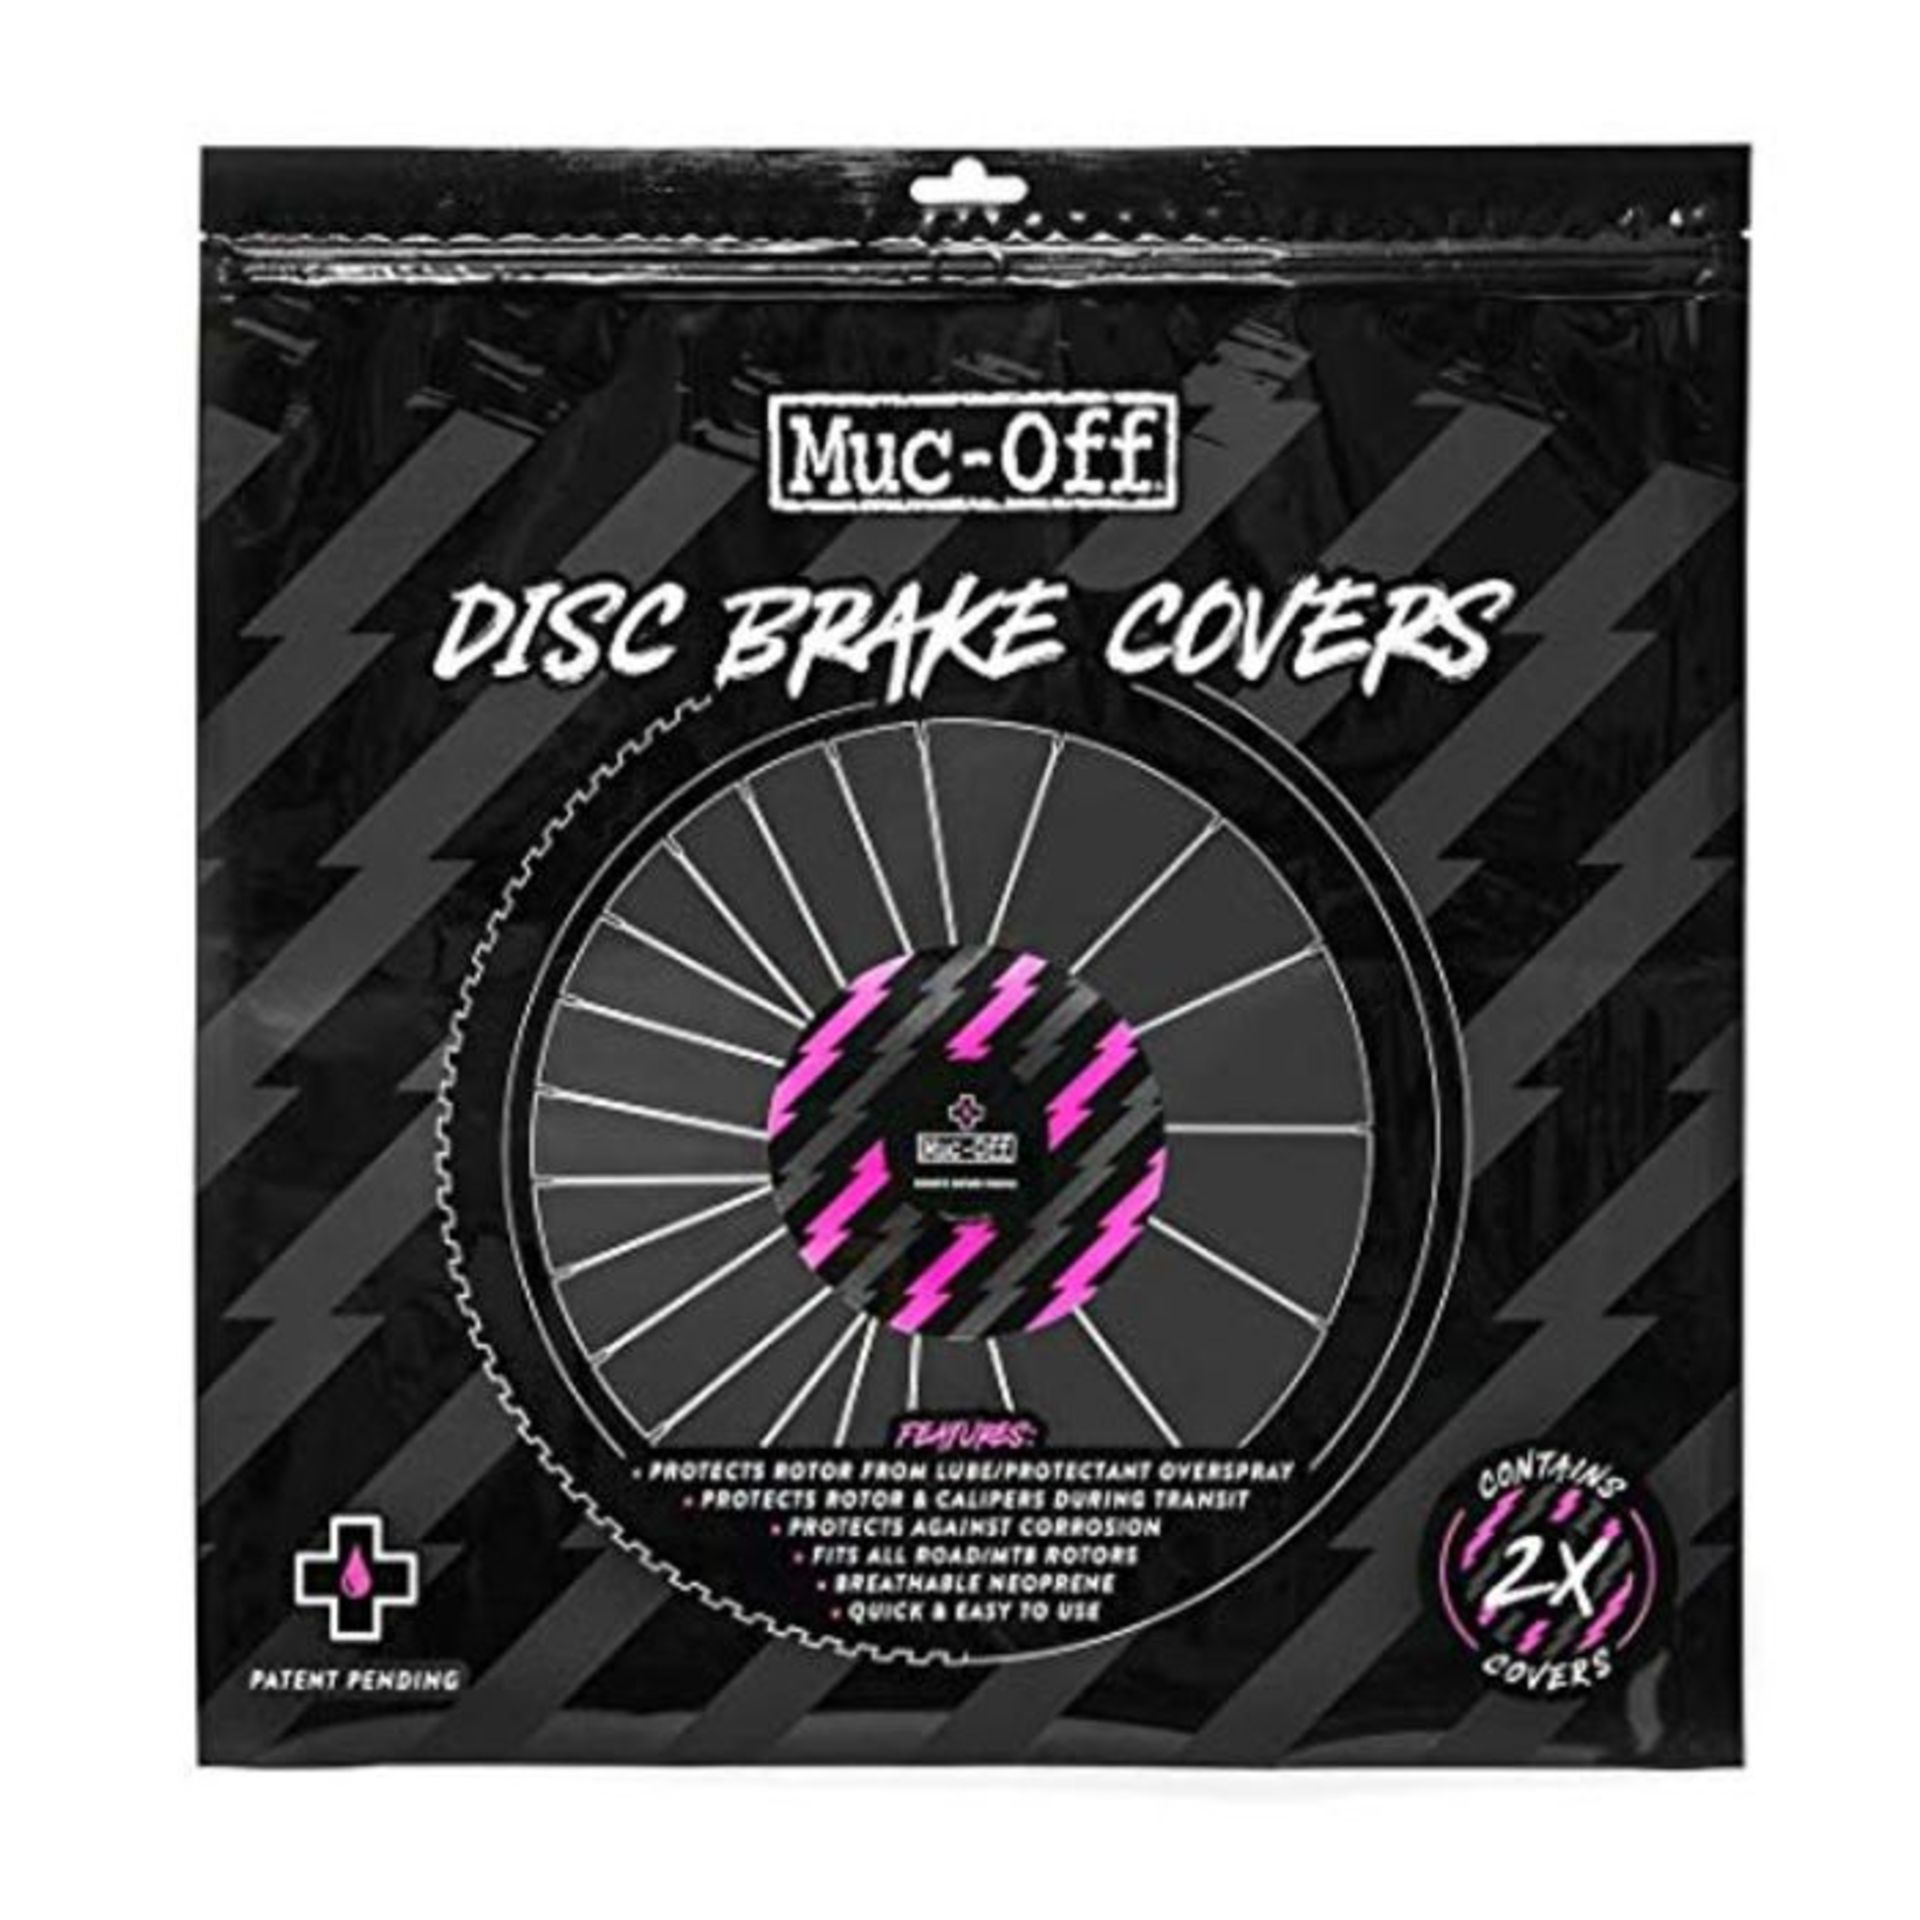 Muc-Off Bolt Disc Brake Covers, Set of 2 - Washable Neoprene Protective Covers for Bic